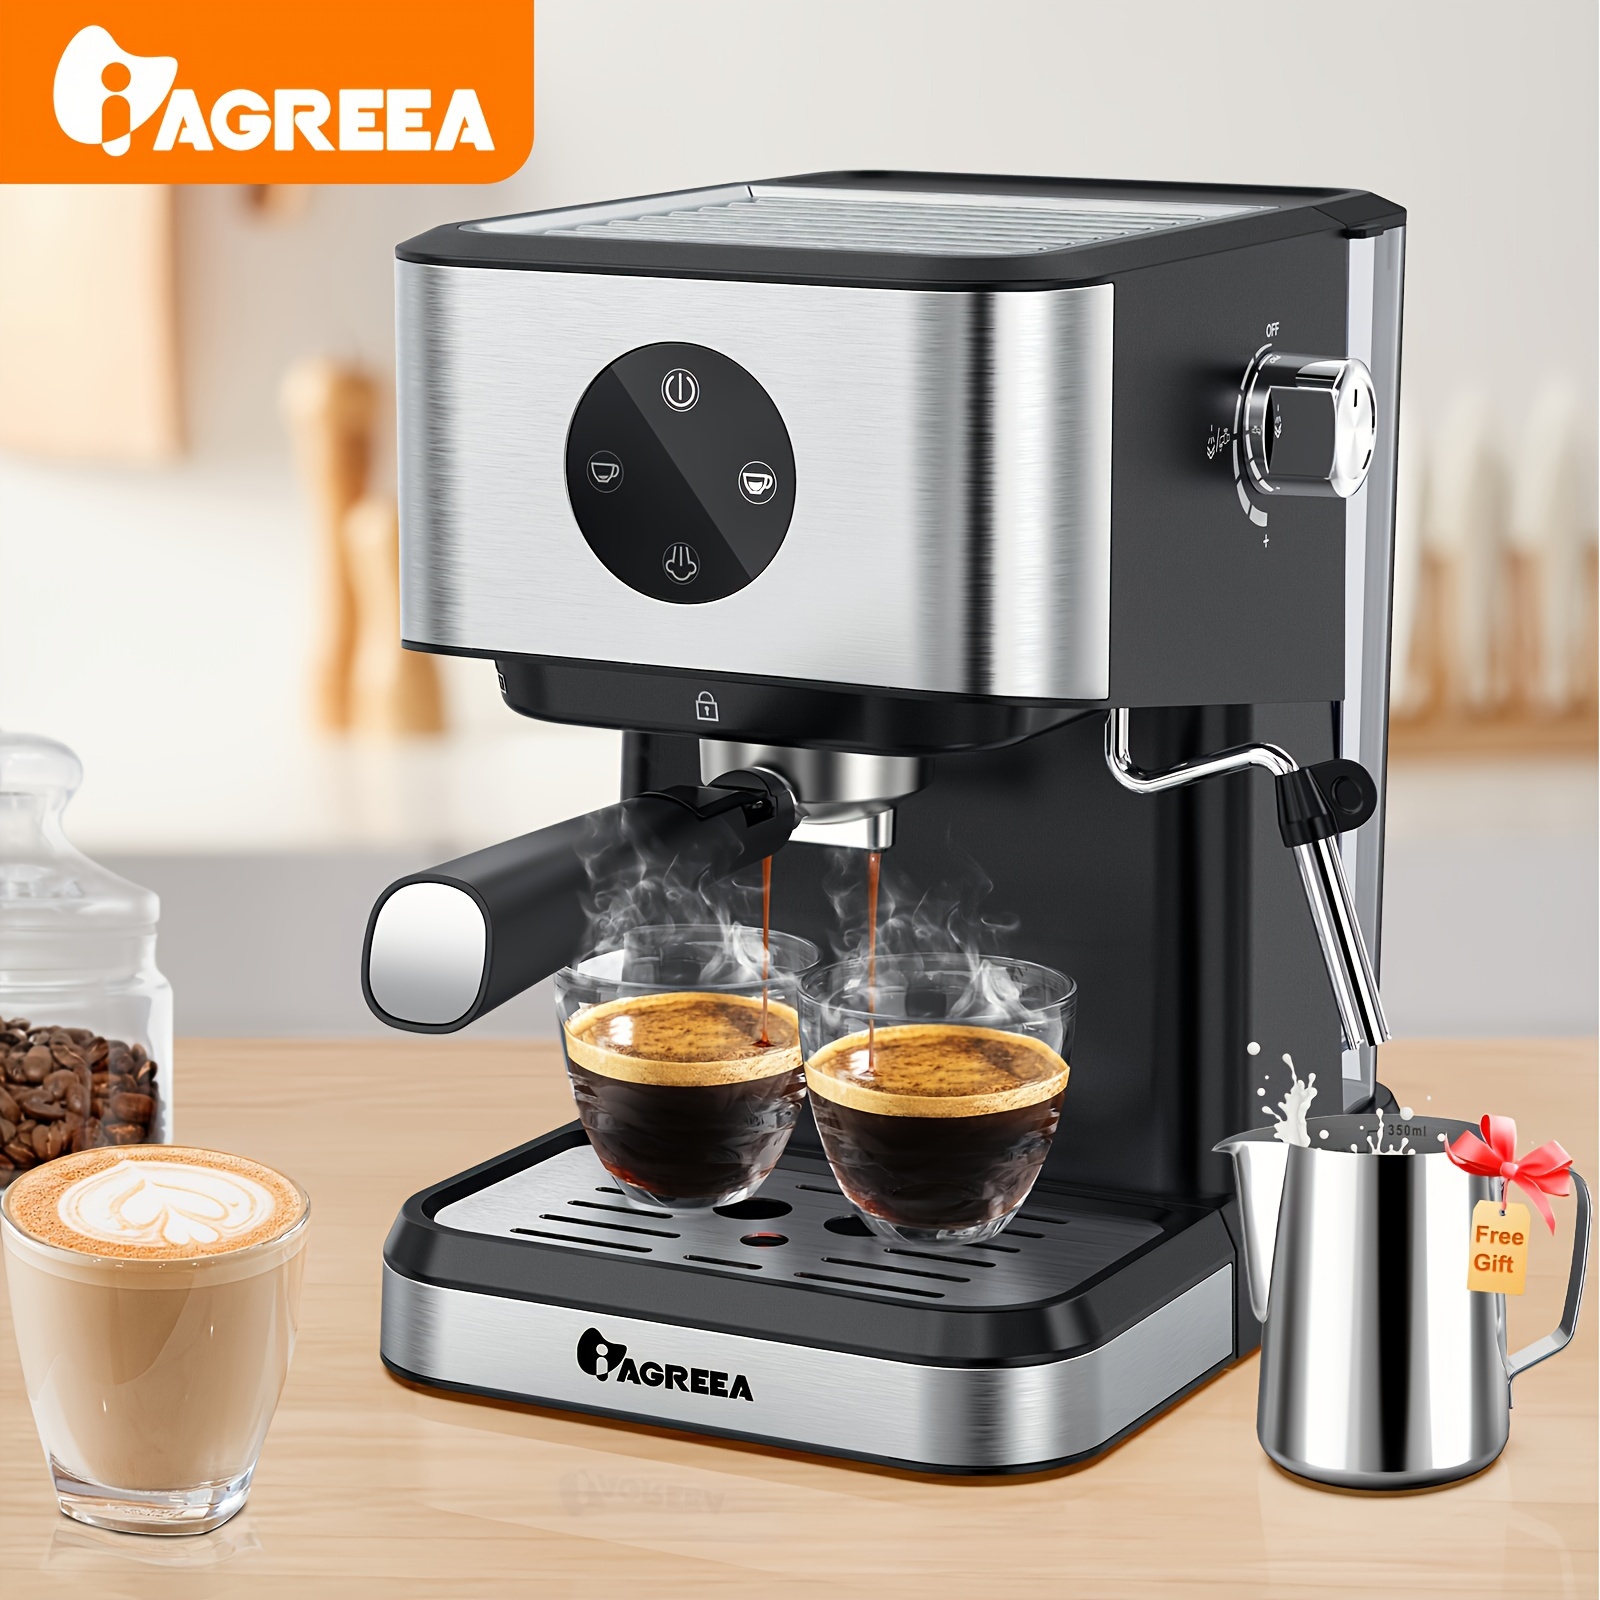 1pc Aeomjk Plug-in Semi-automatic Italian Coffee Maker With 20-bar  Extraction And Milk Frothing System, For Latte, Cappuccino And Espresso,  With Temperature Gauge